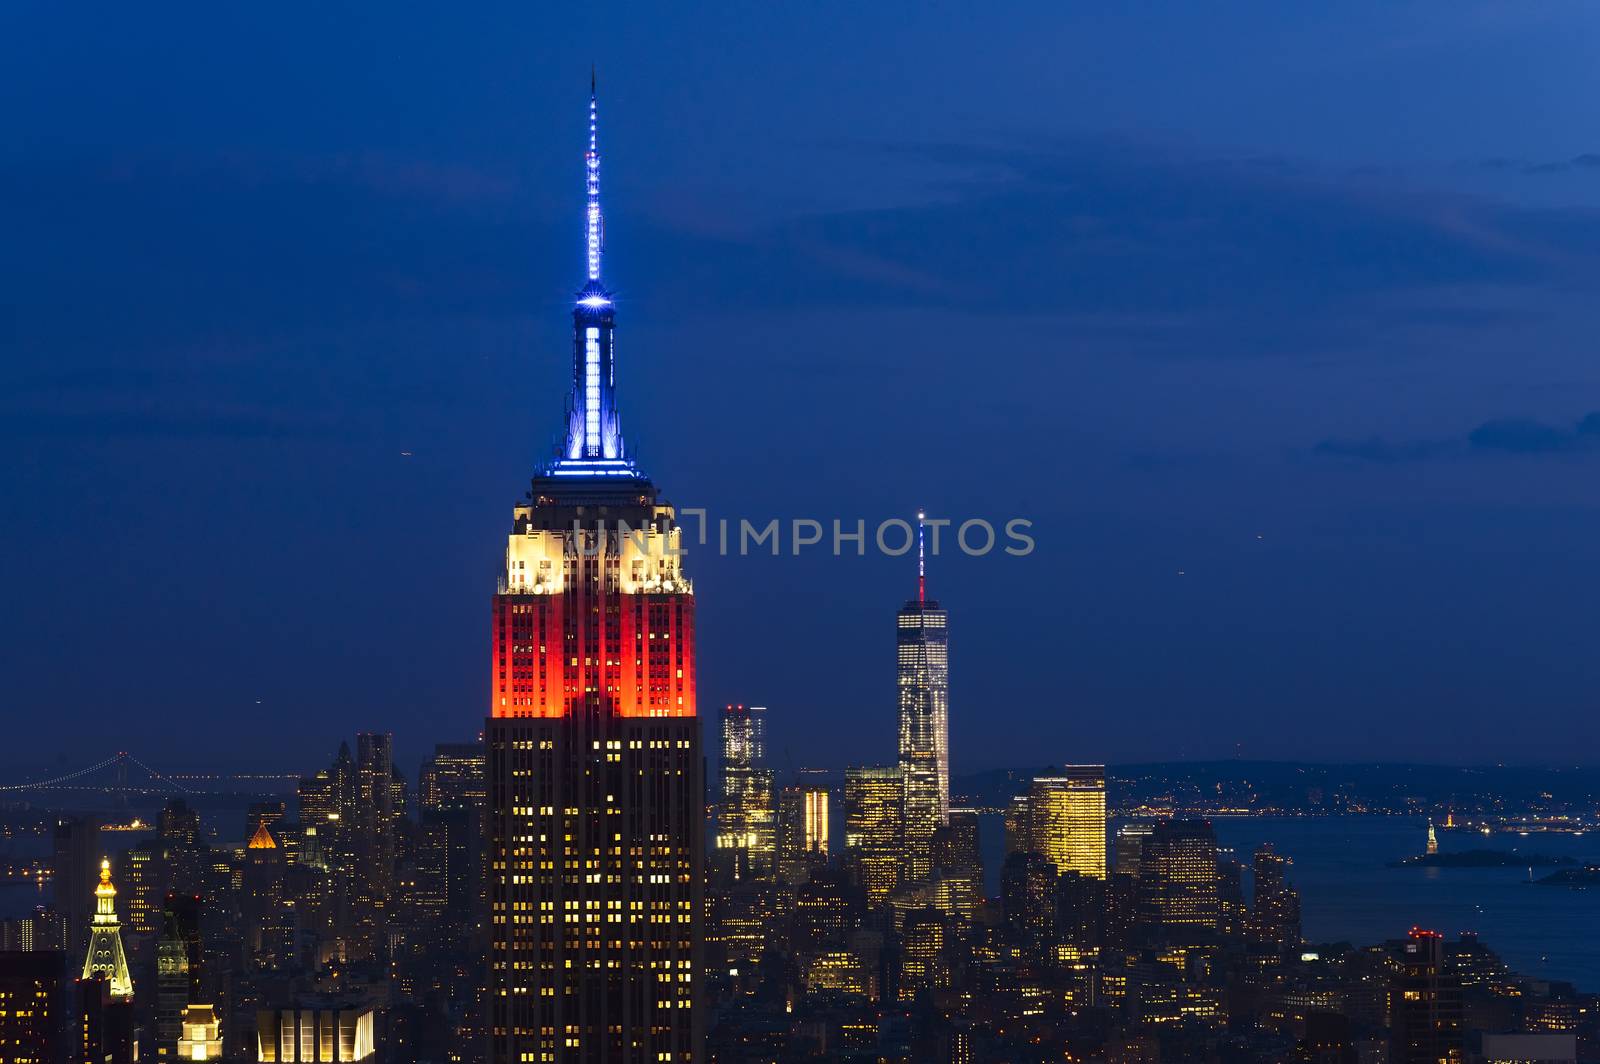 NEW YORK - JULY 11 : Empire state building facade on July 11, 2015. It stood as the world's tallest building for more than 40 years (from 1931 to 1972).